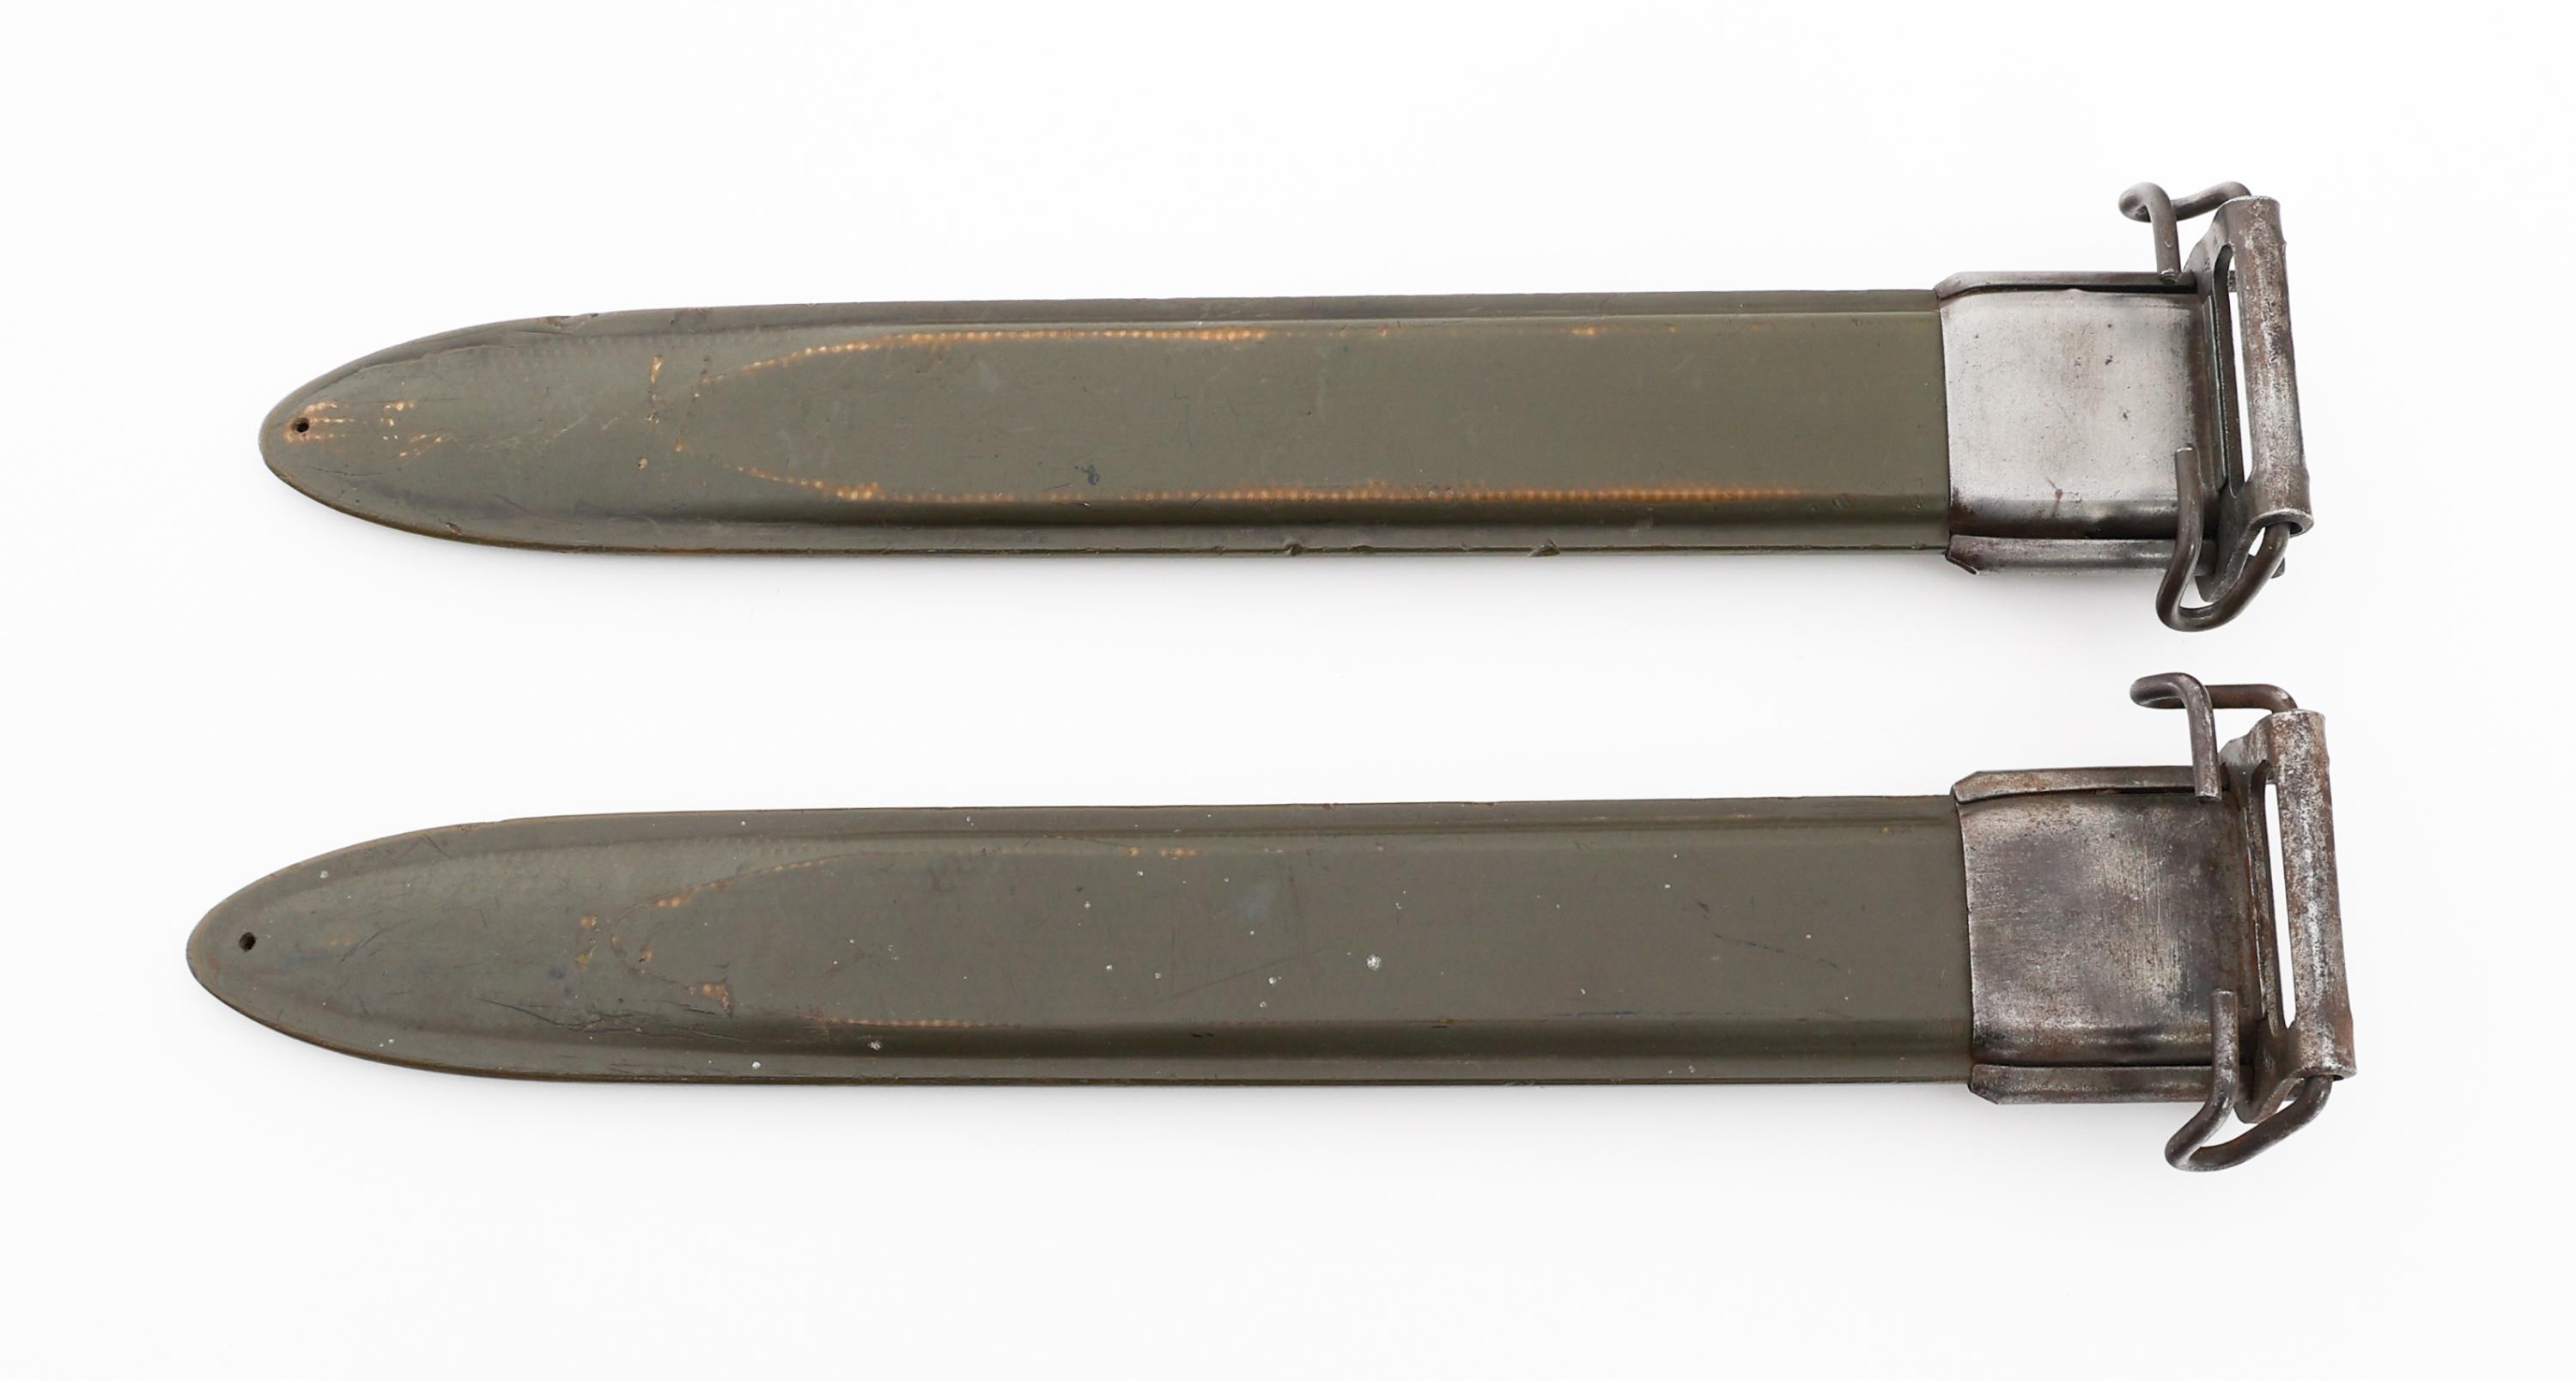 WWII US ARMY M1905E1 & M1 BAYONETS by AFH & UTICA